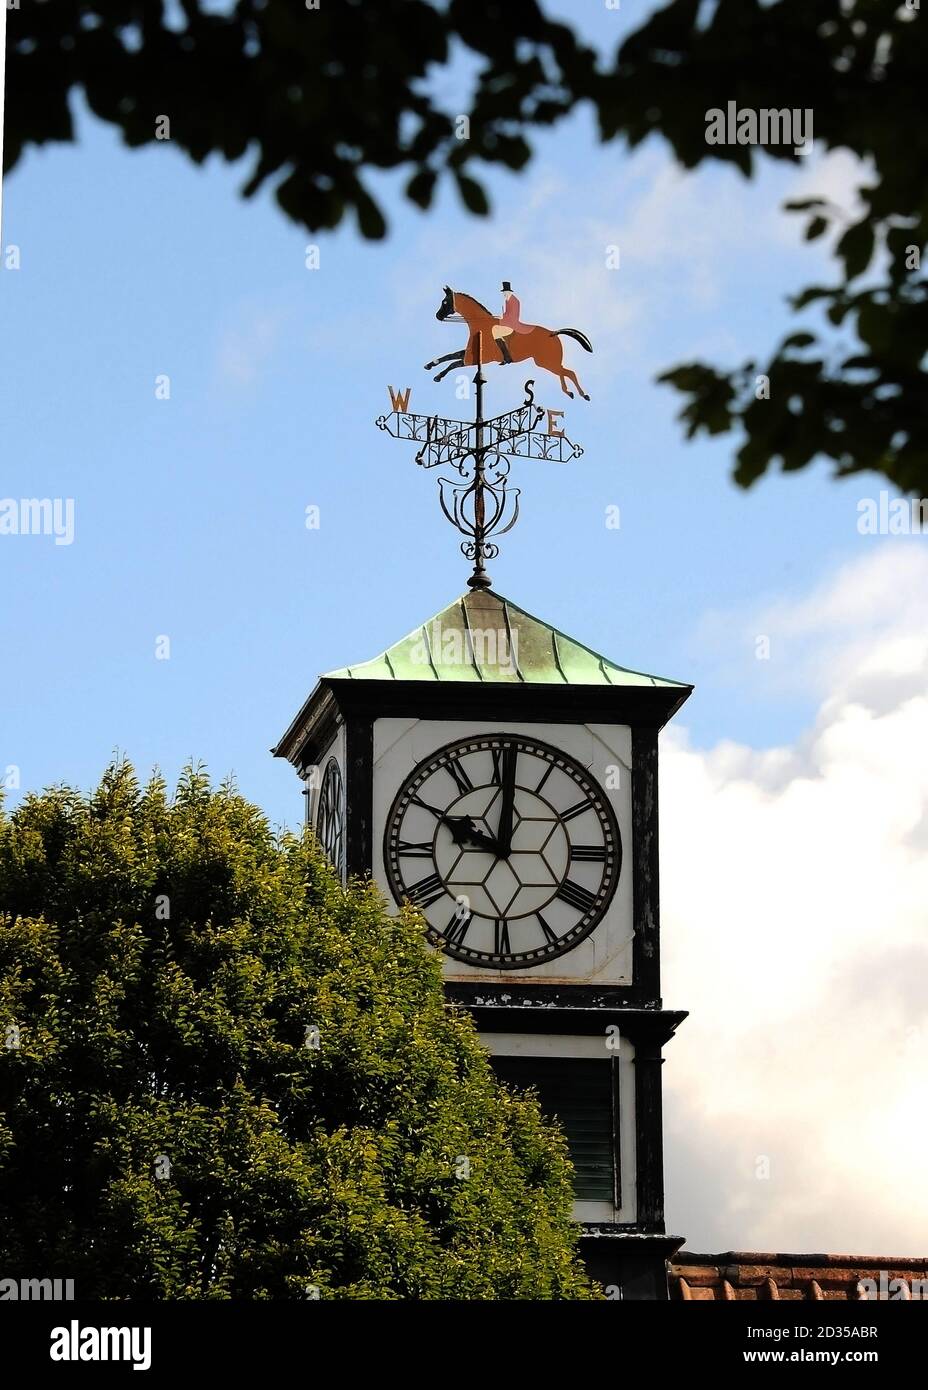 Royal Dublin Horse Show clock tower with weather vane Stock Photo